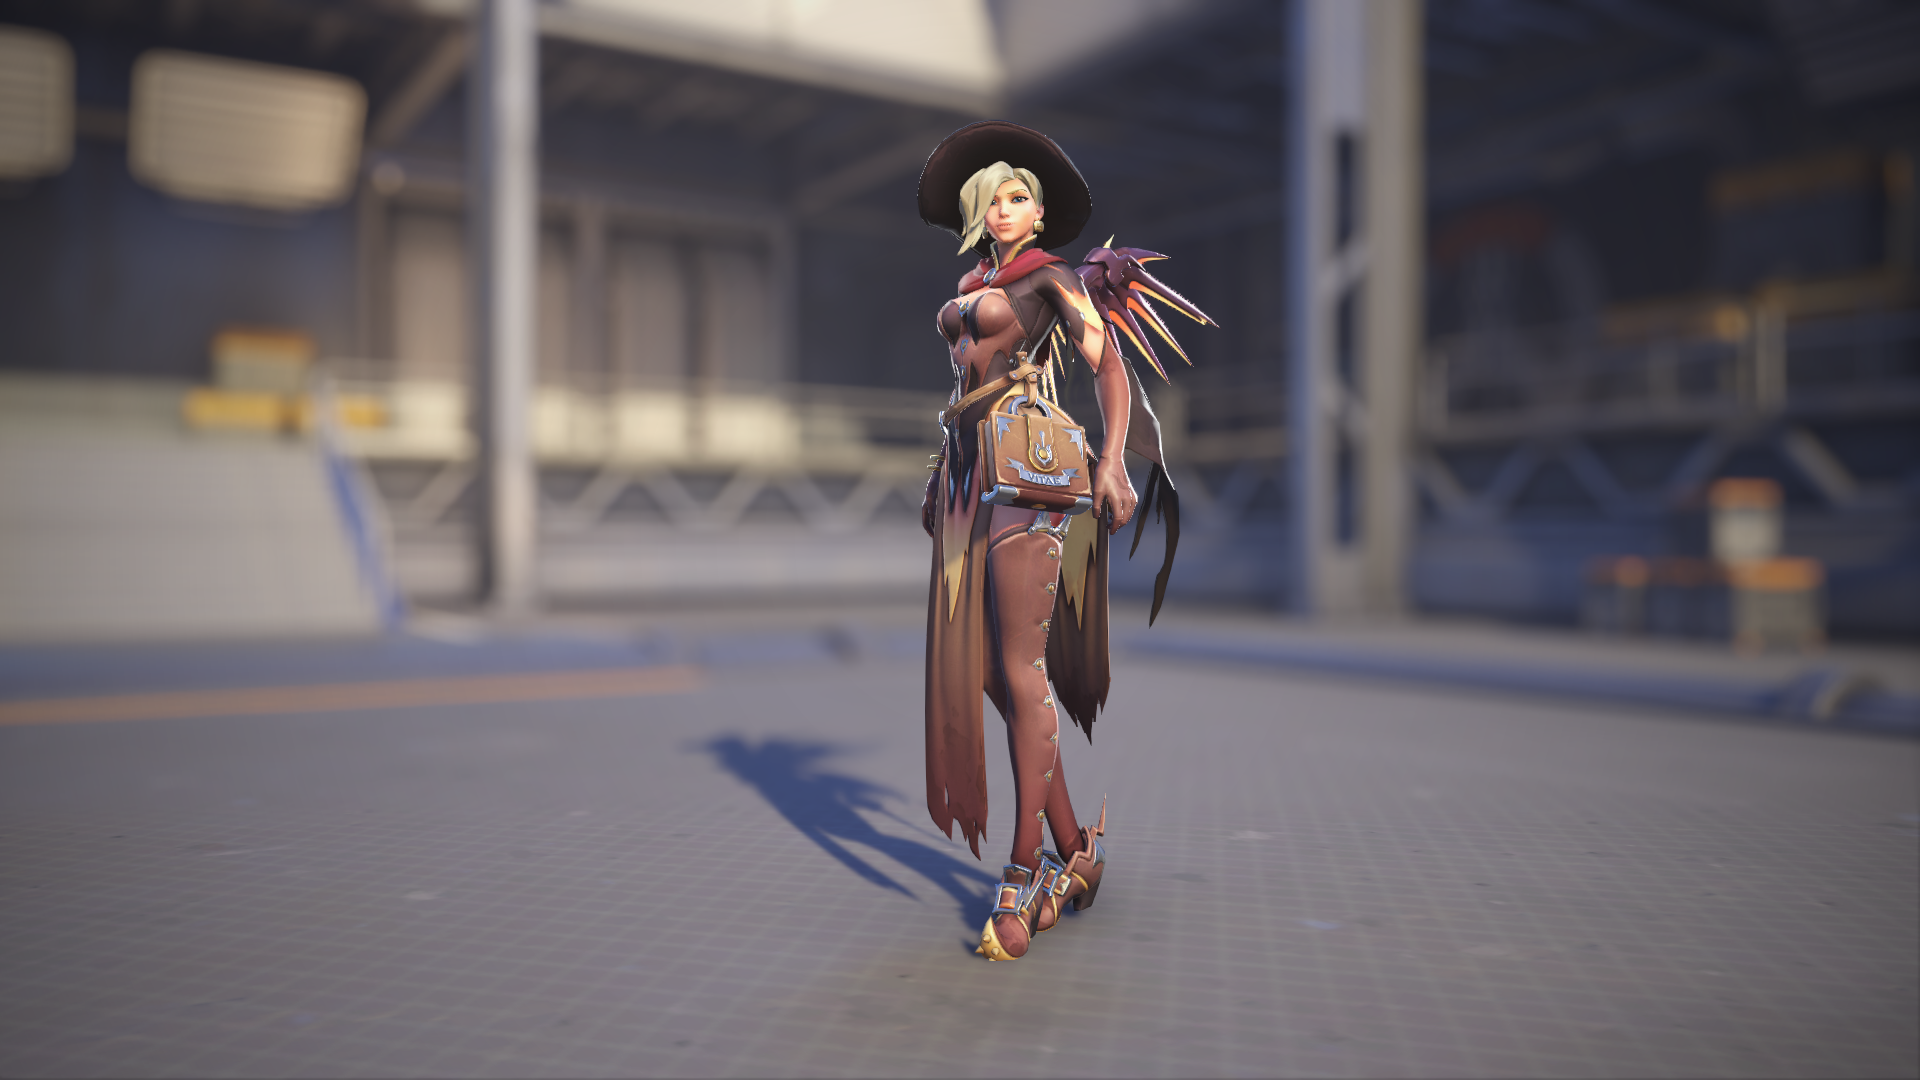 Mercy models her Witch skin in Overwatch 2.